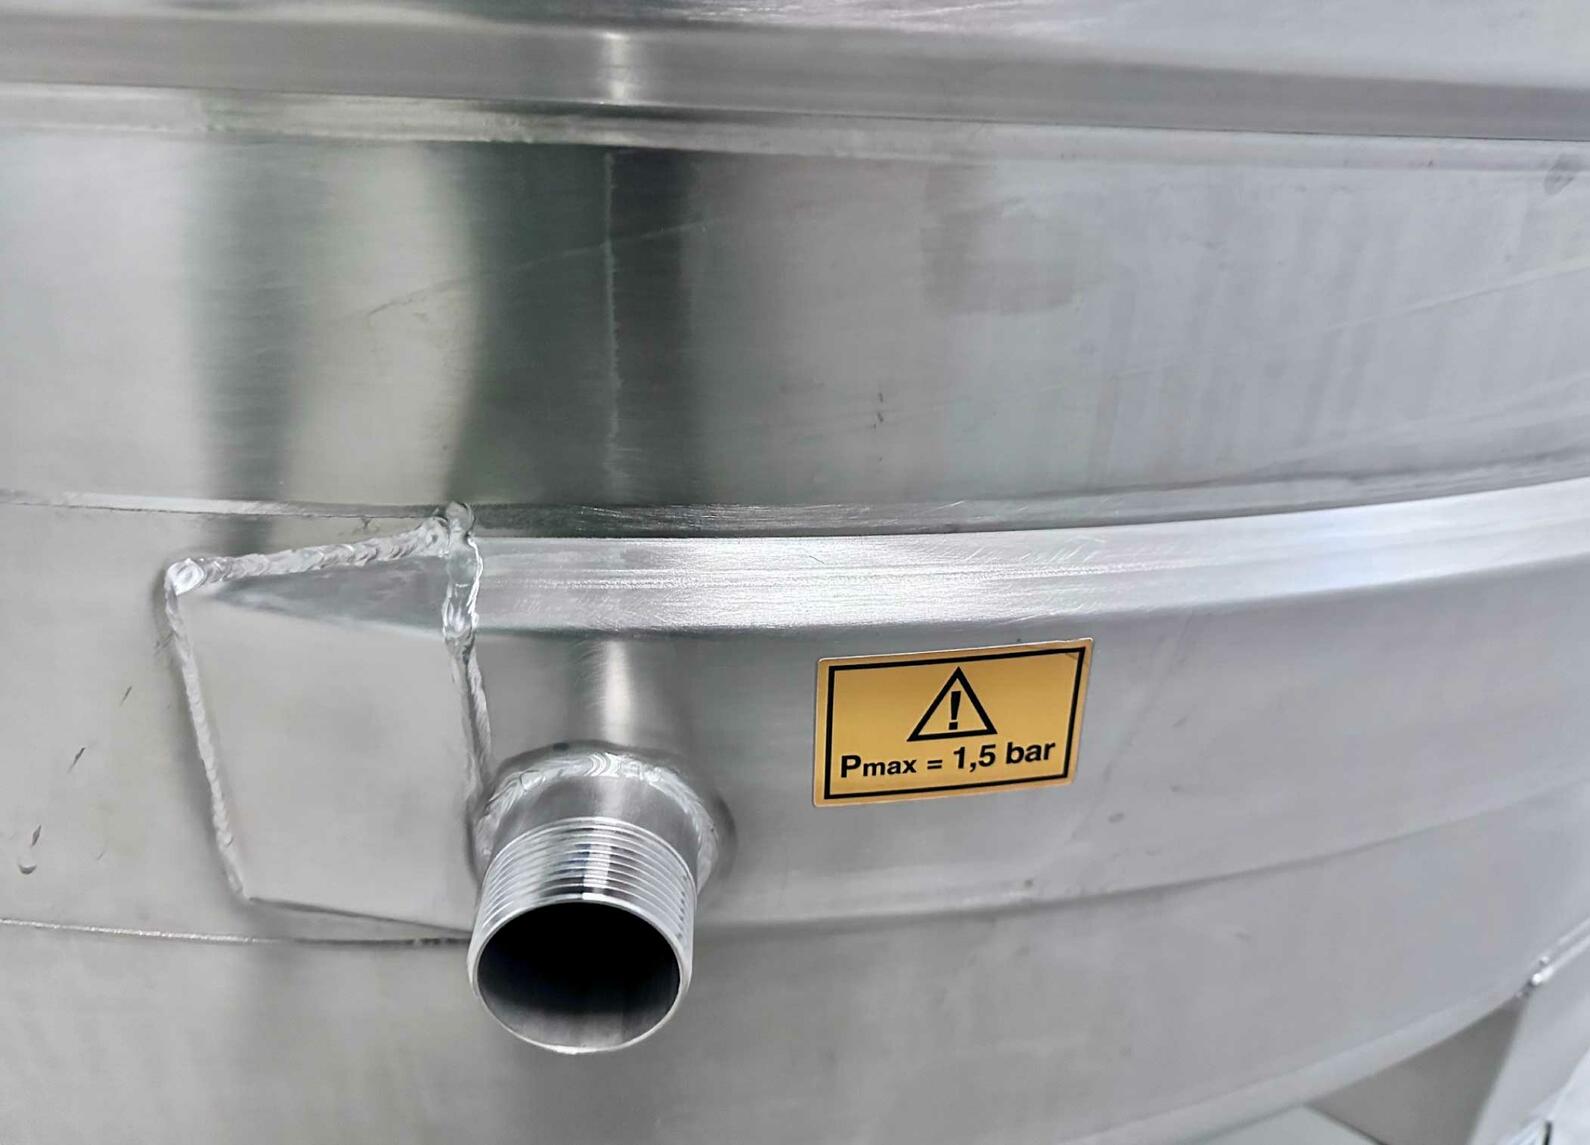 304 stainless steel tank - Cooling coil - STOIPSER4300